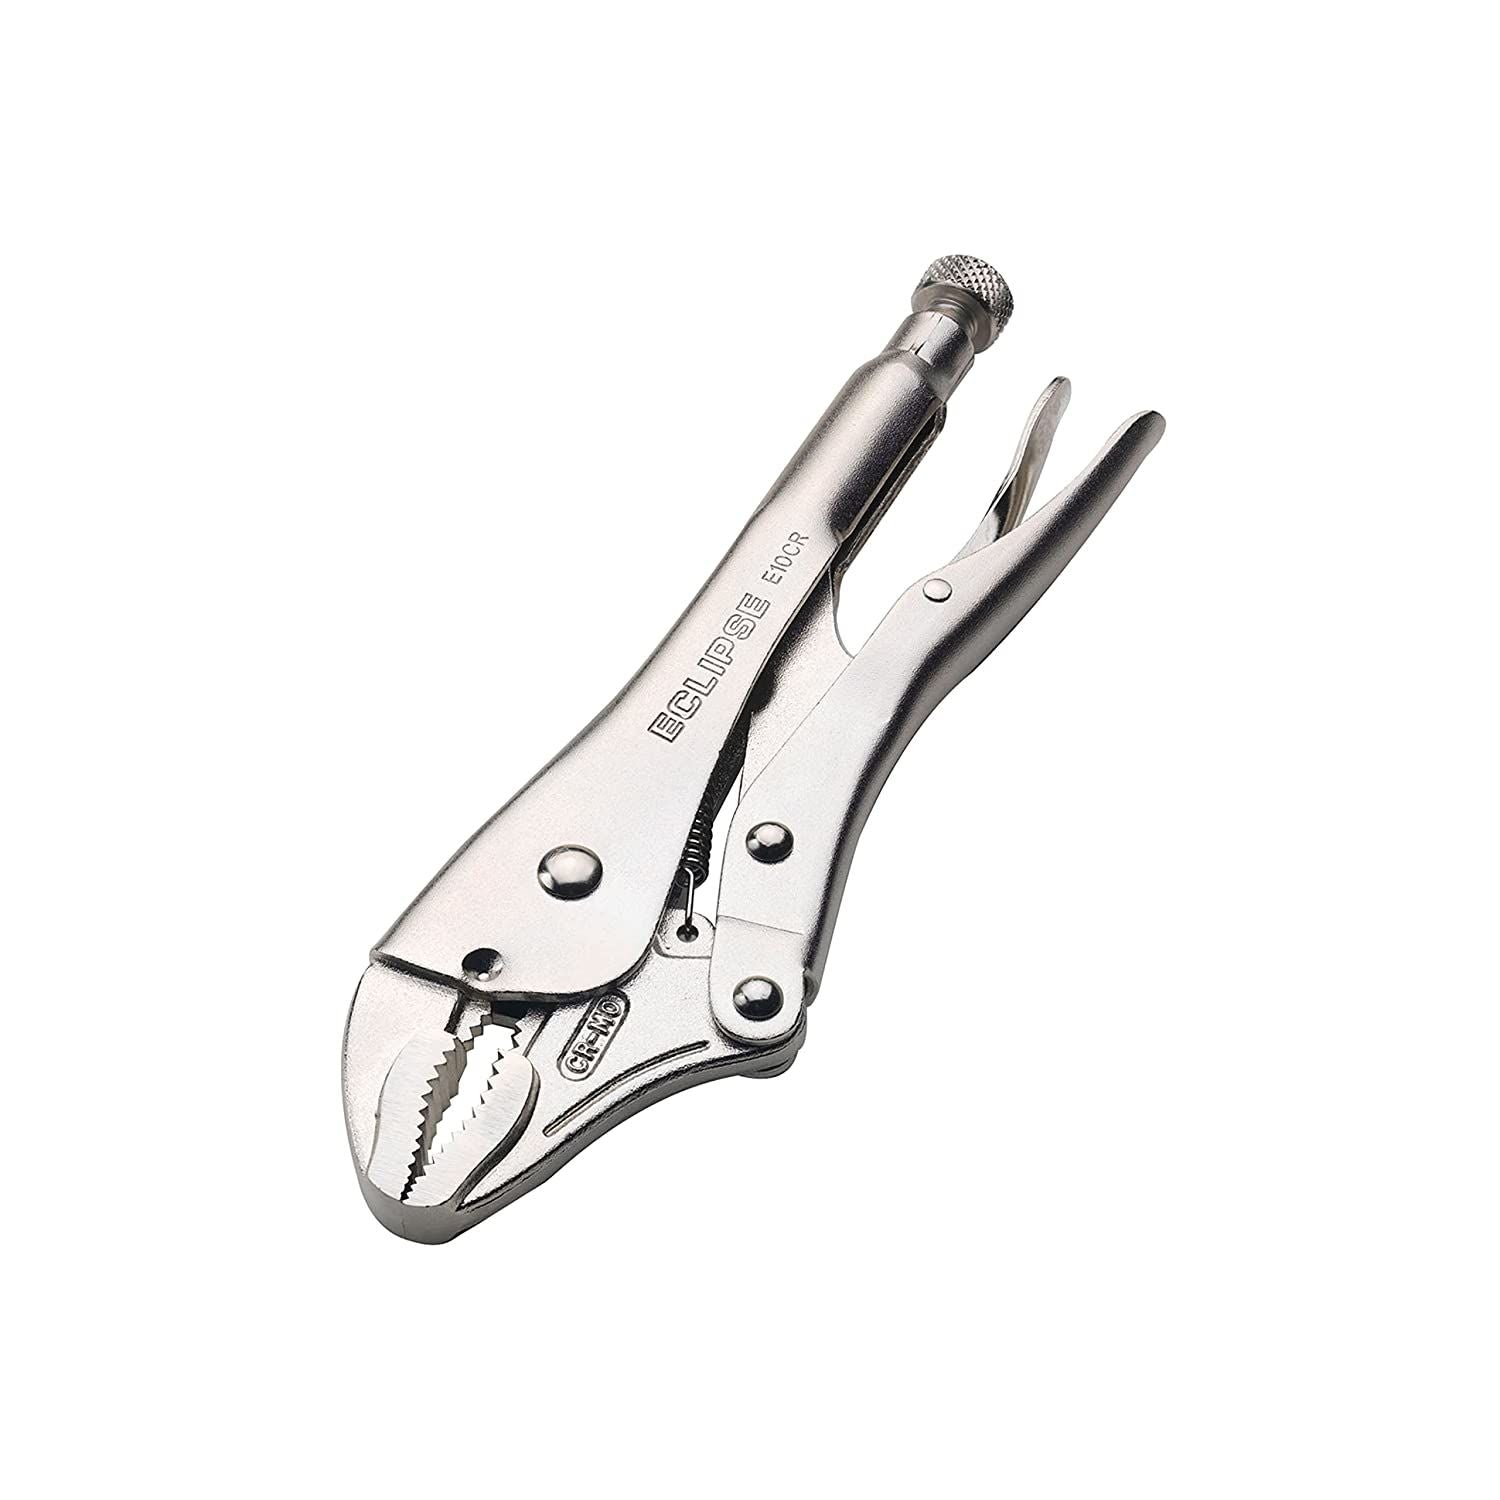 Curved Jaw Locking Pliers, Chrome Molybdenum Steel, 10" Size, 1-7/8" Jaw Capacity